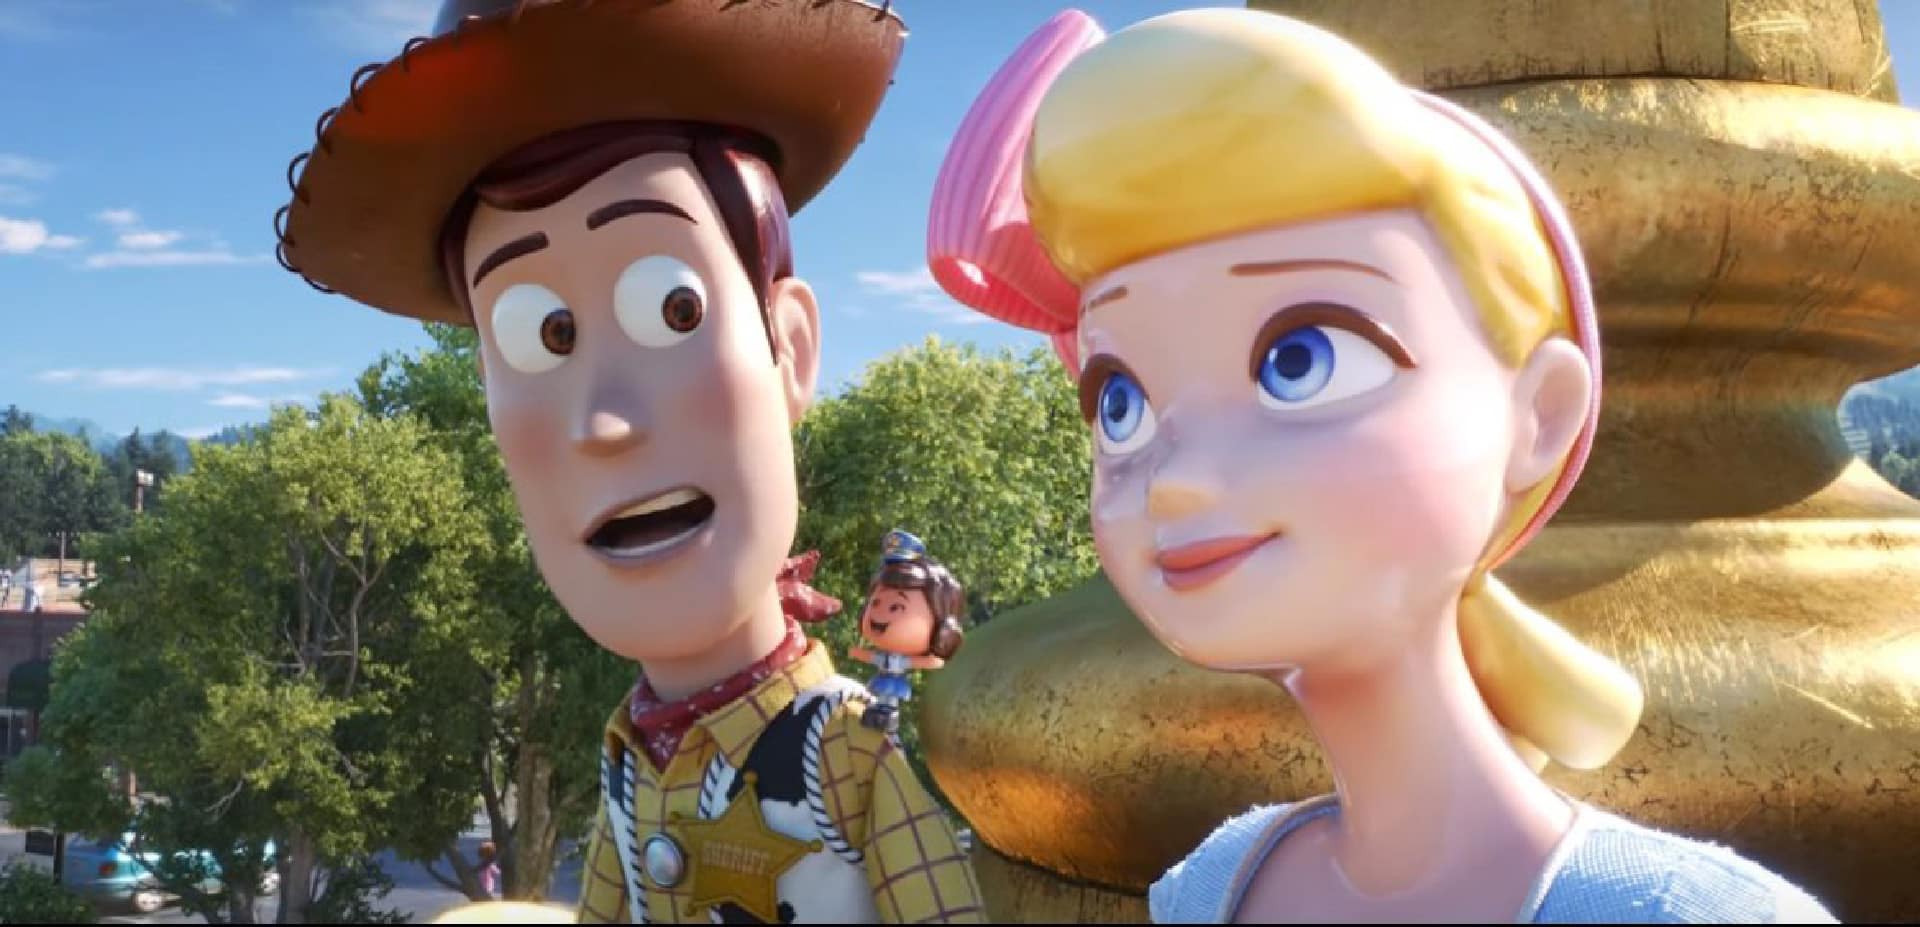 Toy Story 4: in programma due spin-off per Disney+